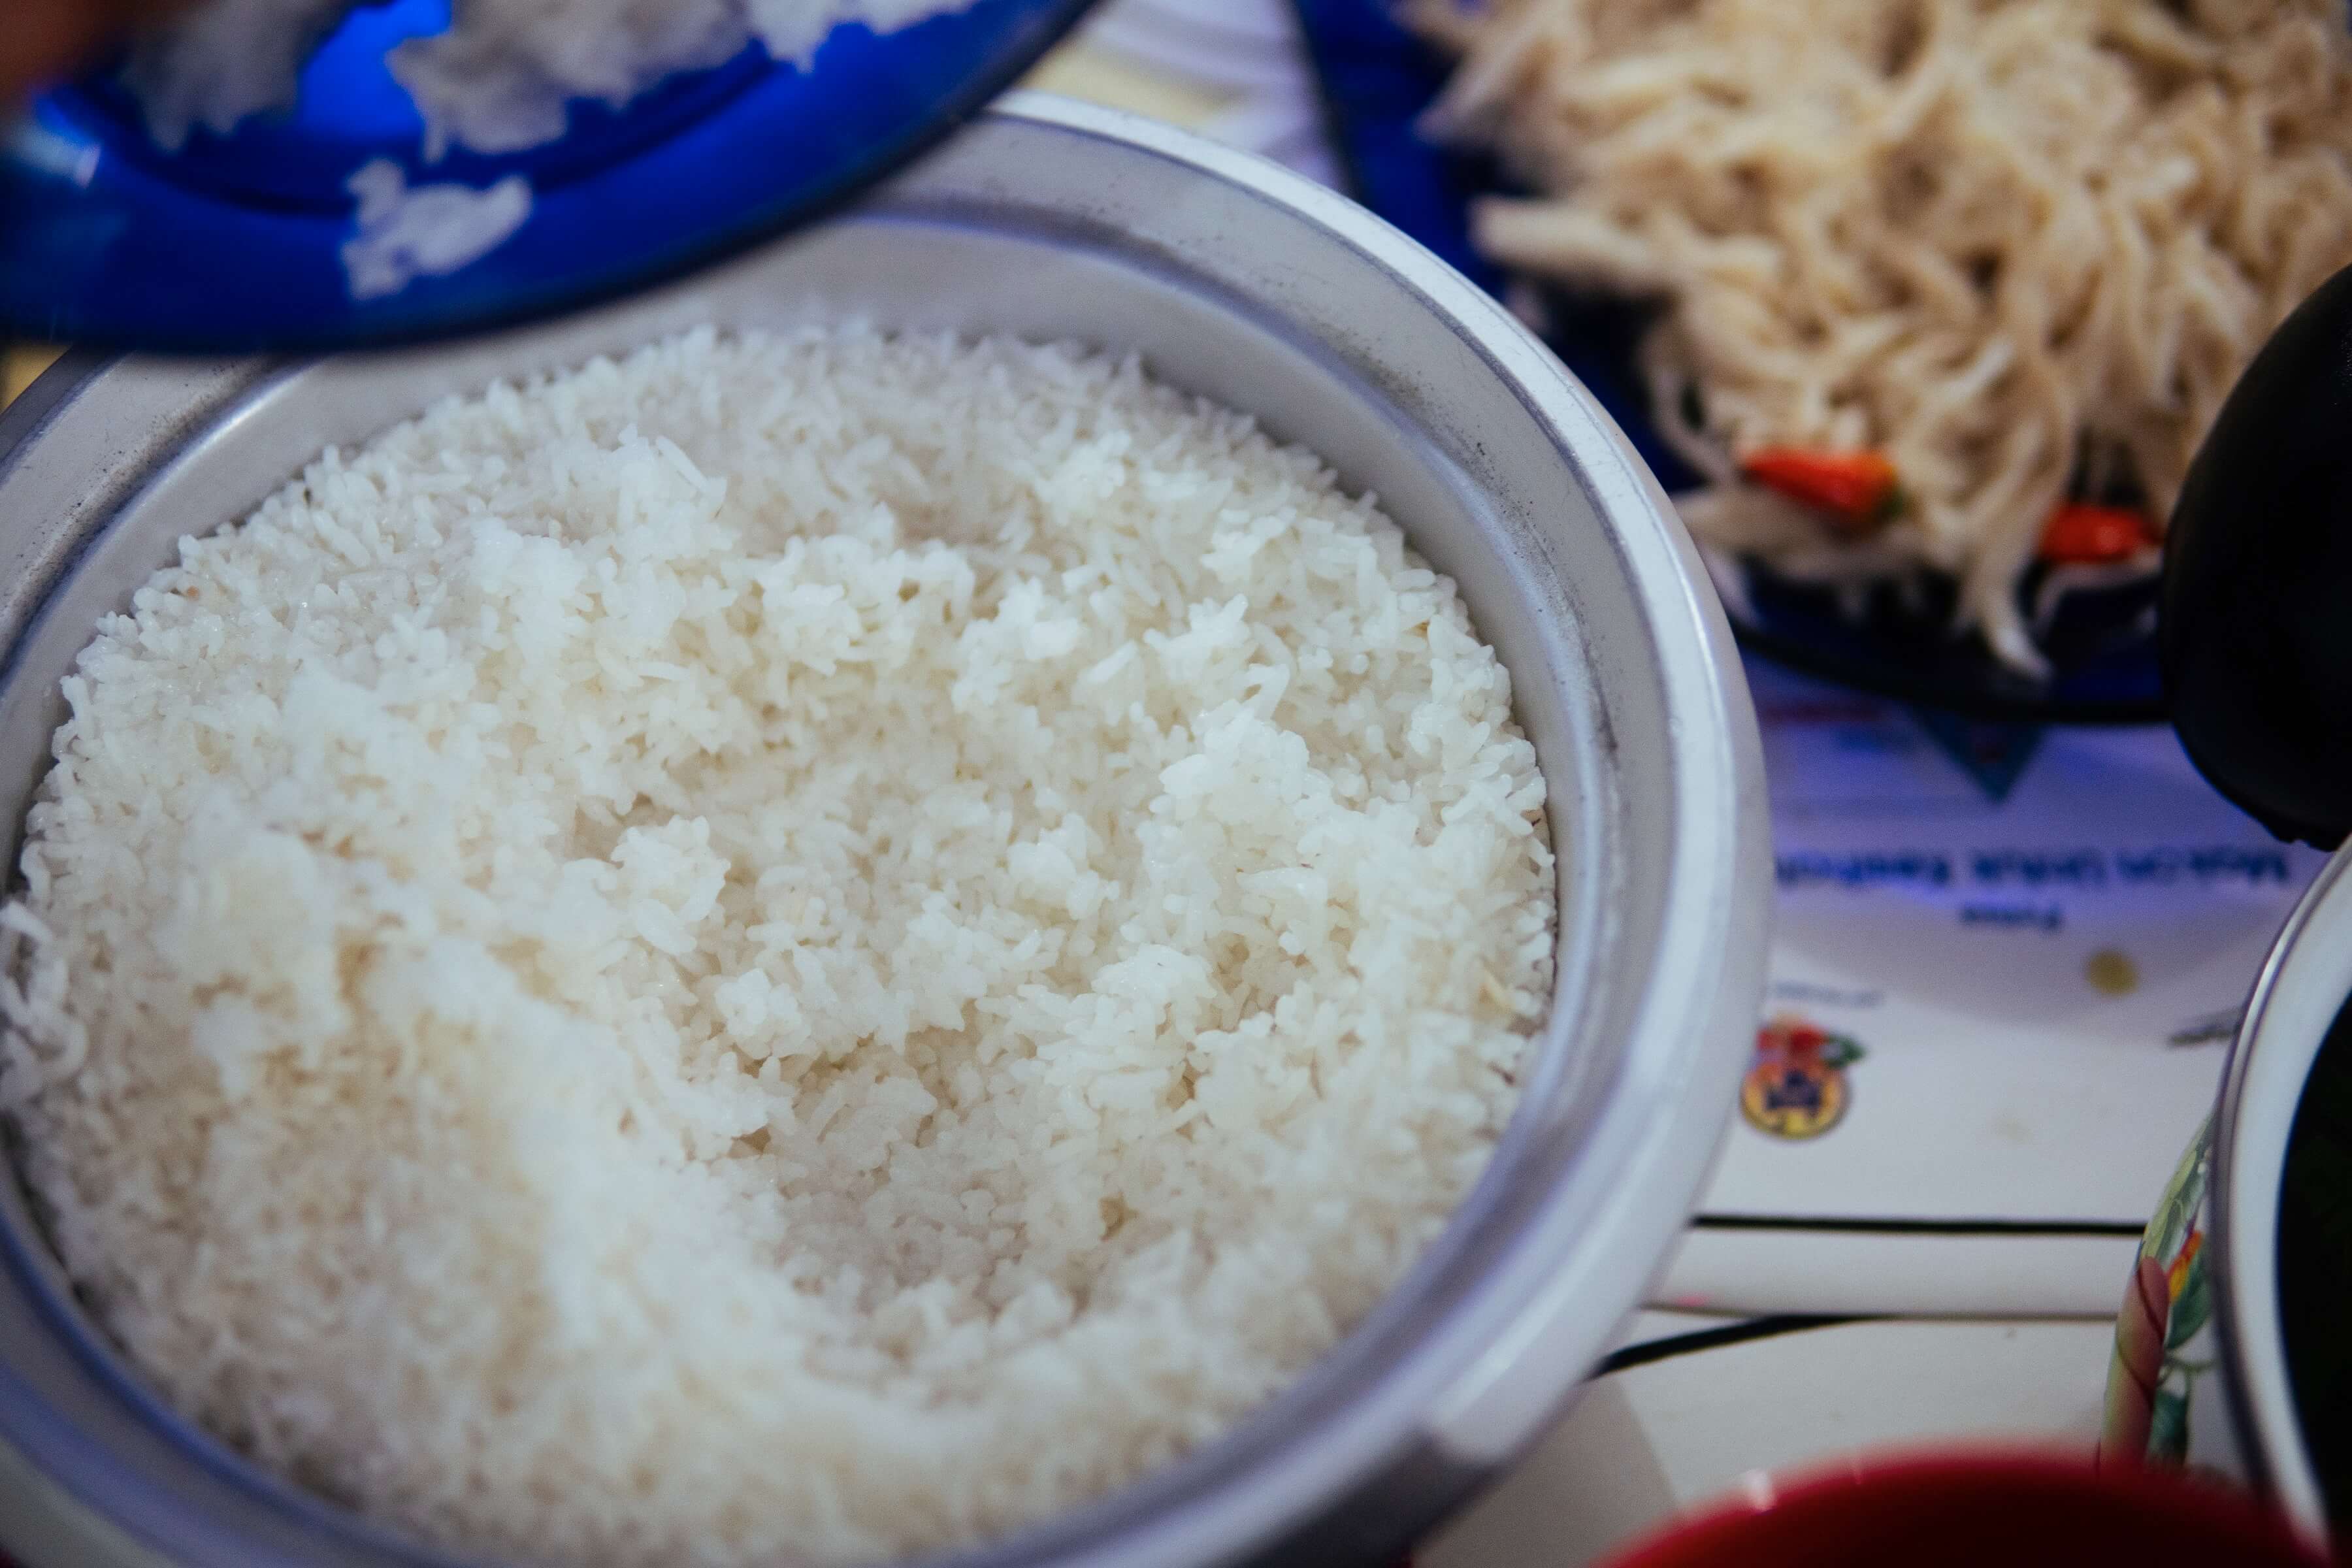 A close-up of a pot of perfectly-cooked white rice, each grain firm and distinct. The star crop is, of course, rice. Farmers like Aunty Ribed once threw away anything they couldn’t eat themselves, as the rice fetched poor prices that barely covered the cost of transport. Now, with Langit paying them fair prices and transporting the produce directly to more lucrative markets, rice has become a crop that nourishes farmers financially too